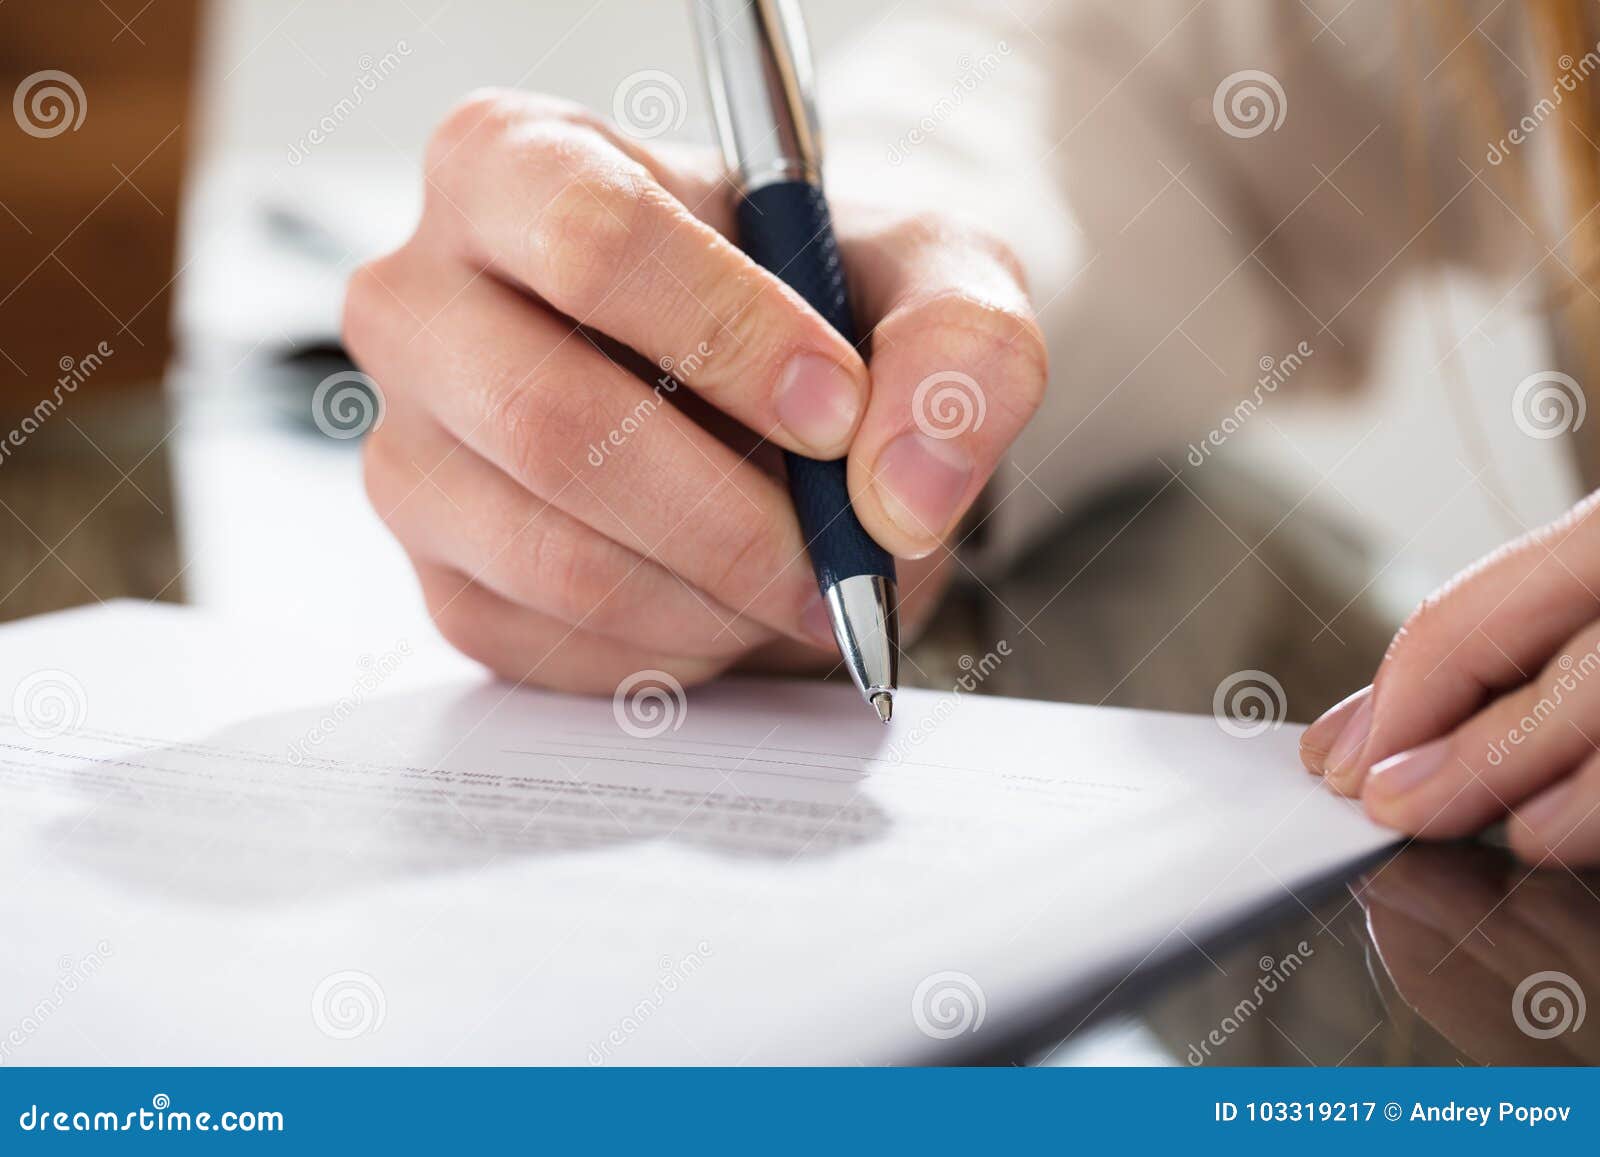 business person signing document with pen